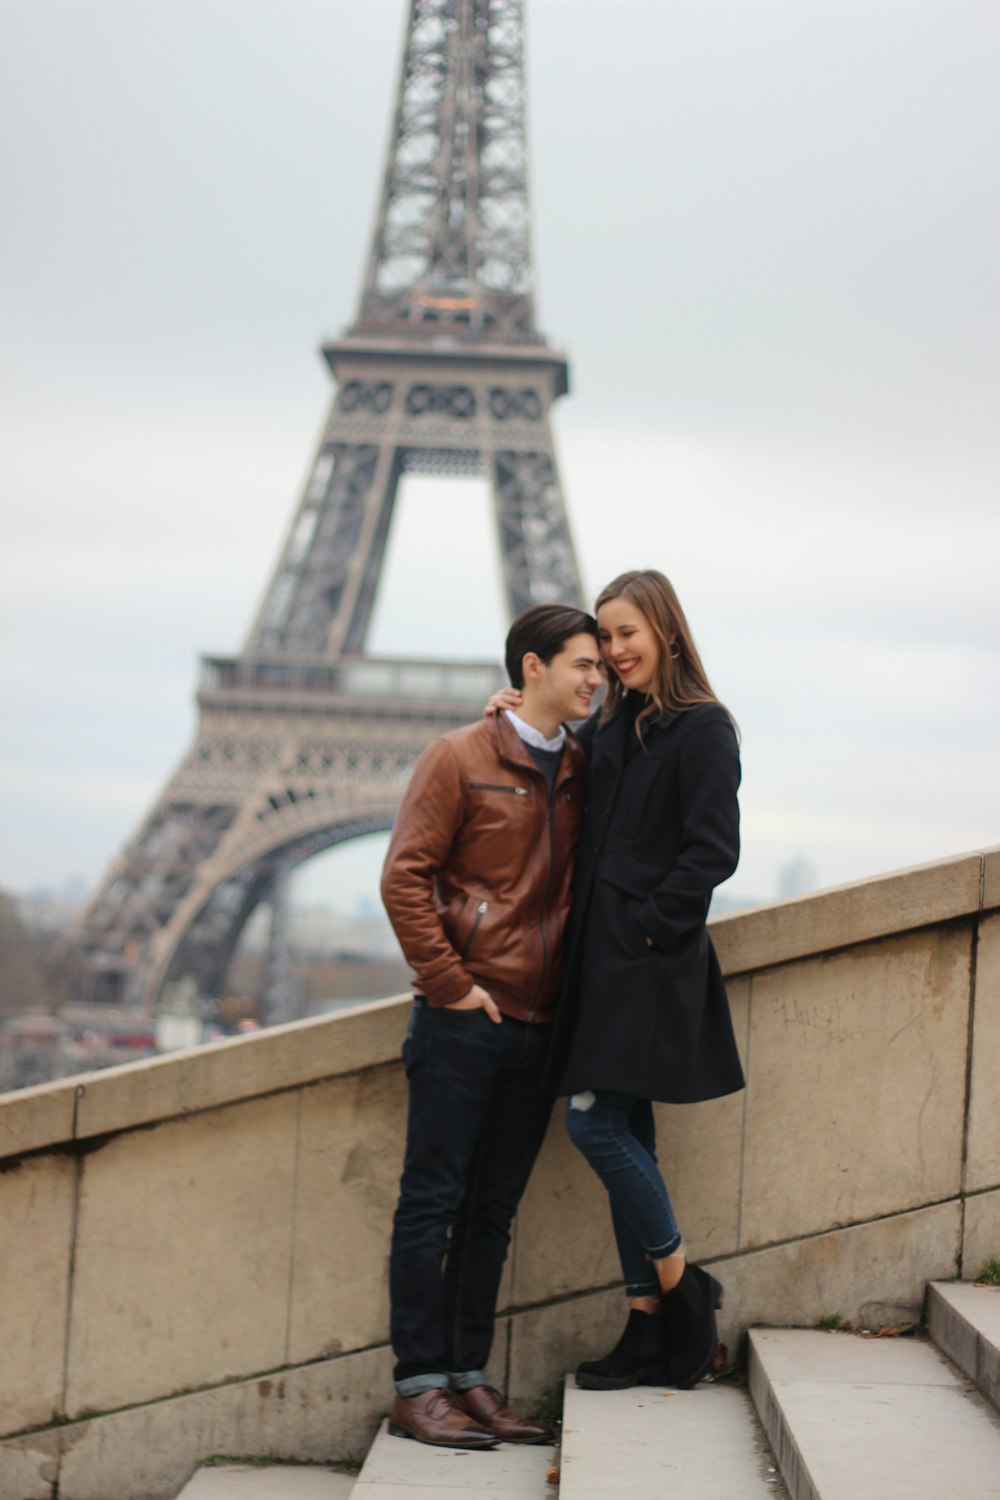 man and woman standing on stairs behind of Eiffel Tower